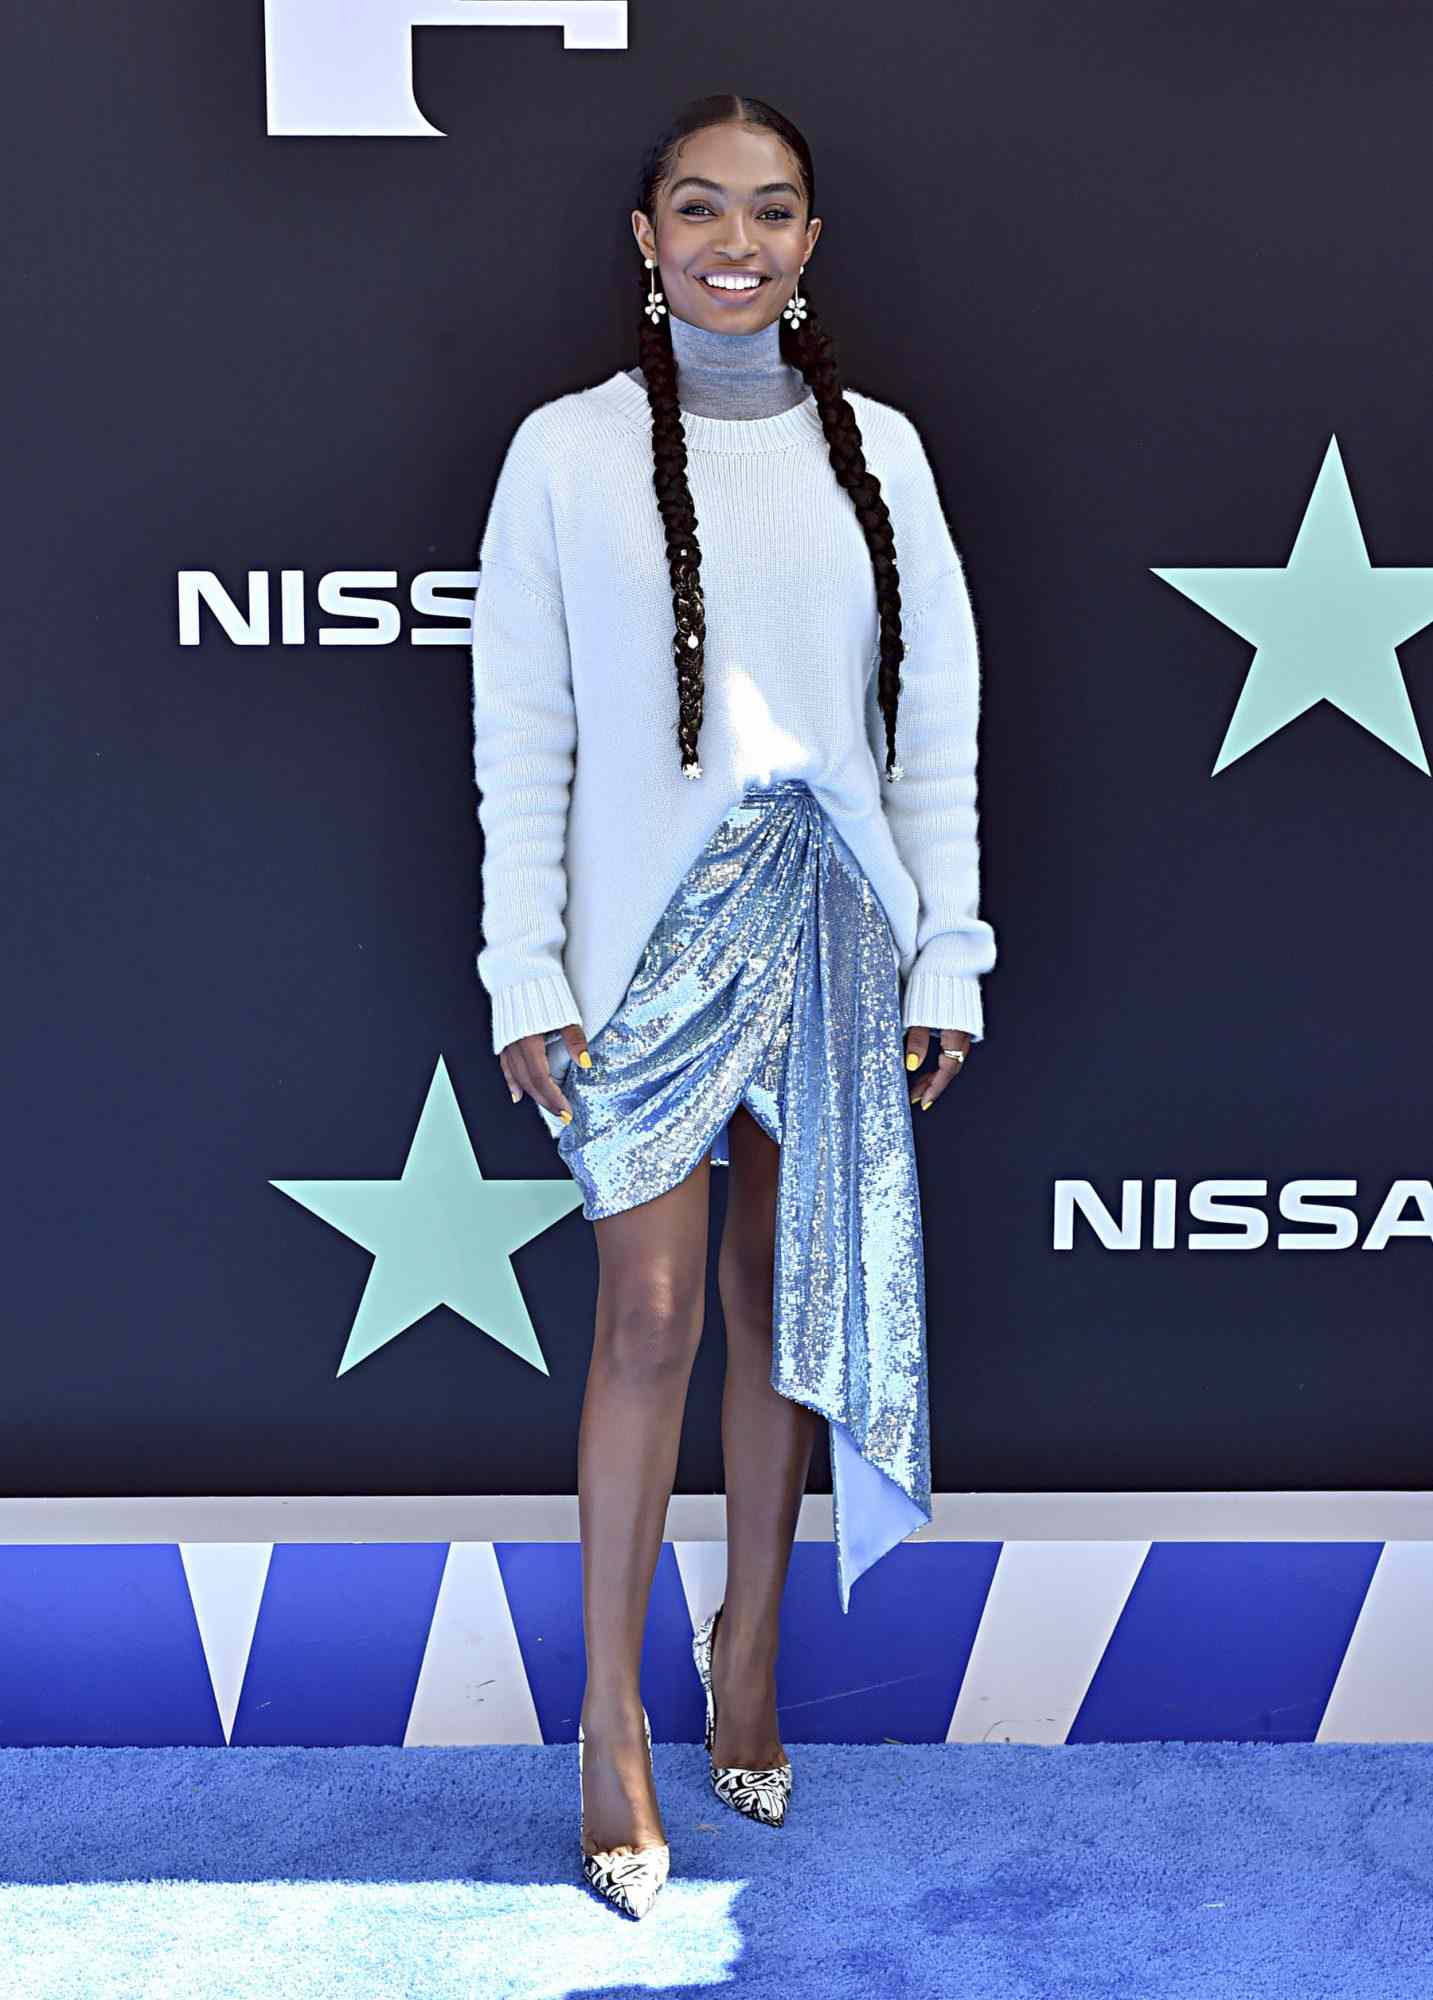 LOS ANGELES, CALIFORNIA - JUNE 23: Yara Shahidi attends the 2019 BET Awards at Microsoft Theater on June 23, 2019 in Los Angeles, California. (Photo by Aaron J. Thornton/Getty Images for BET)